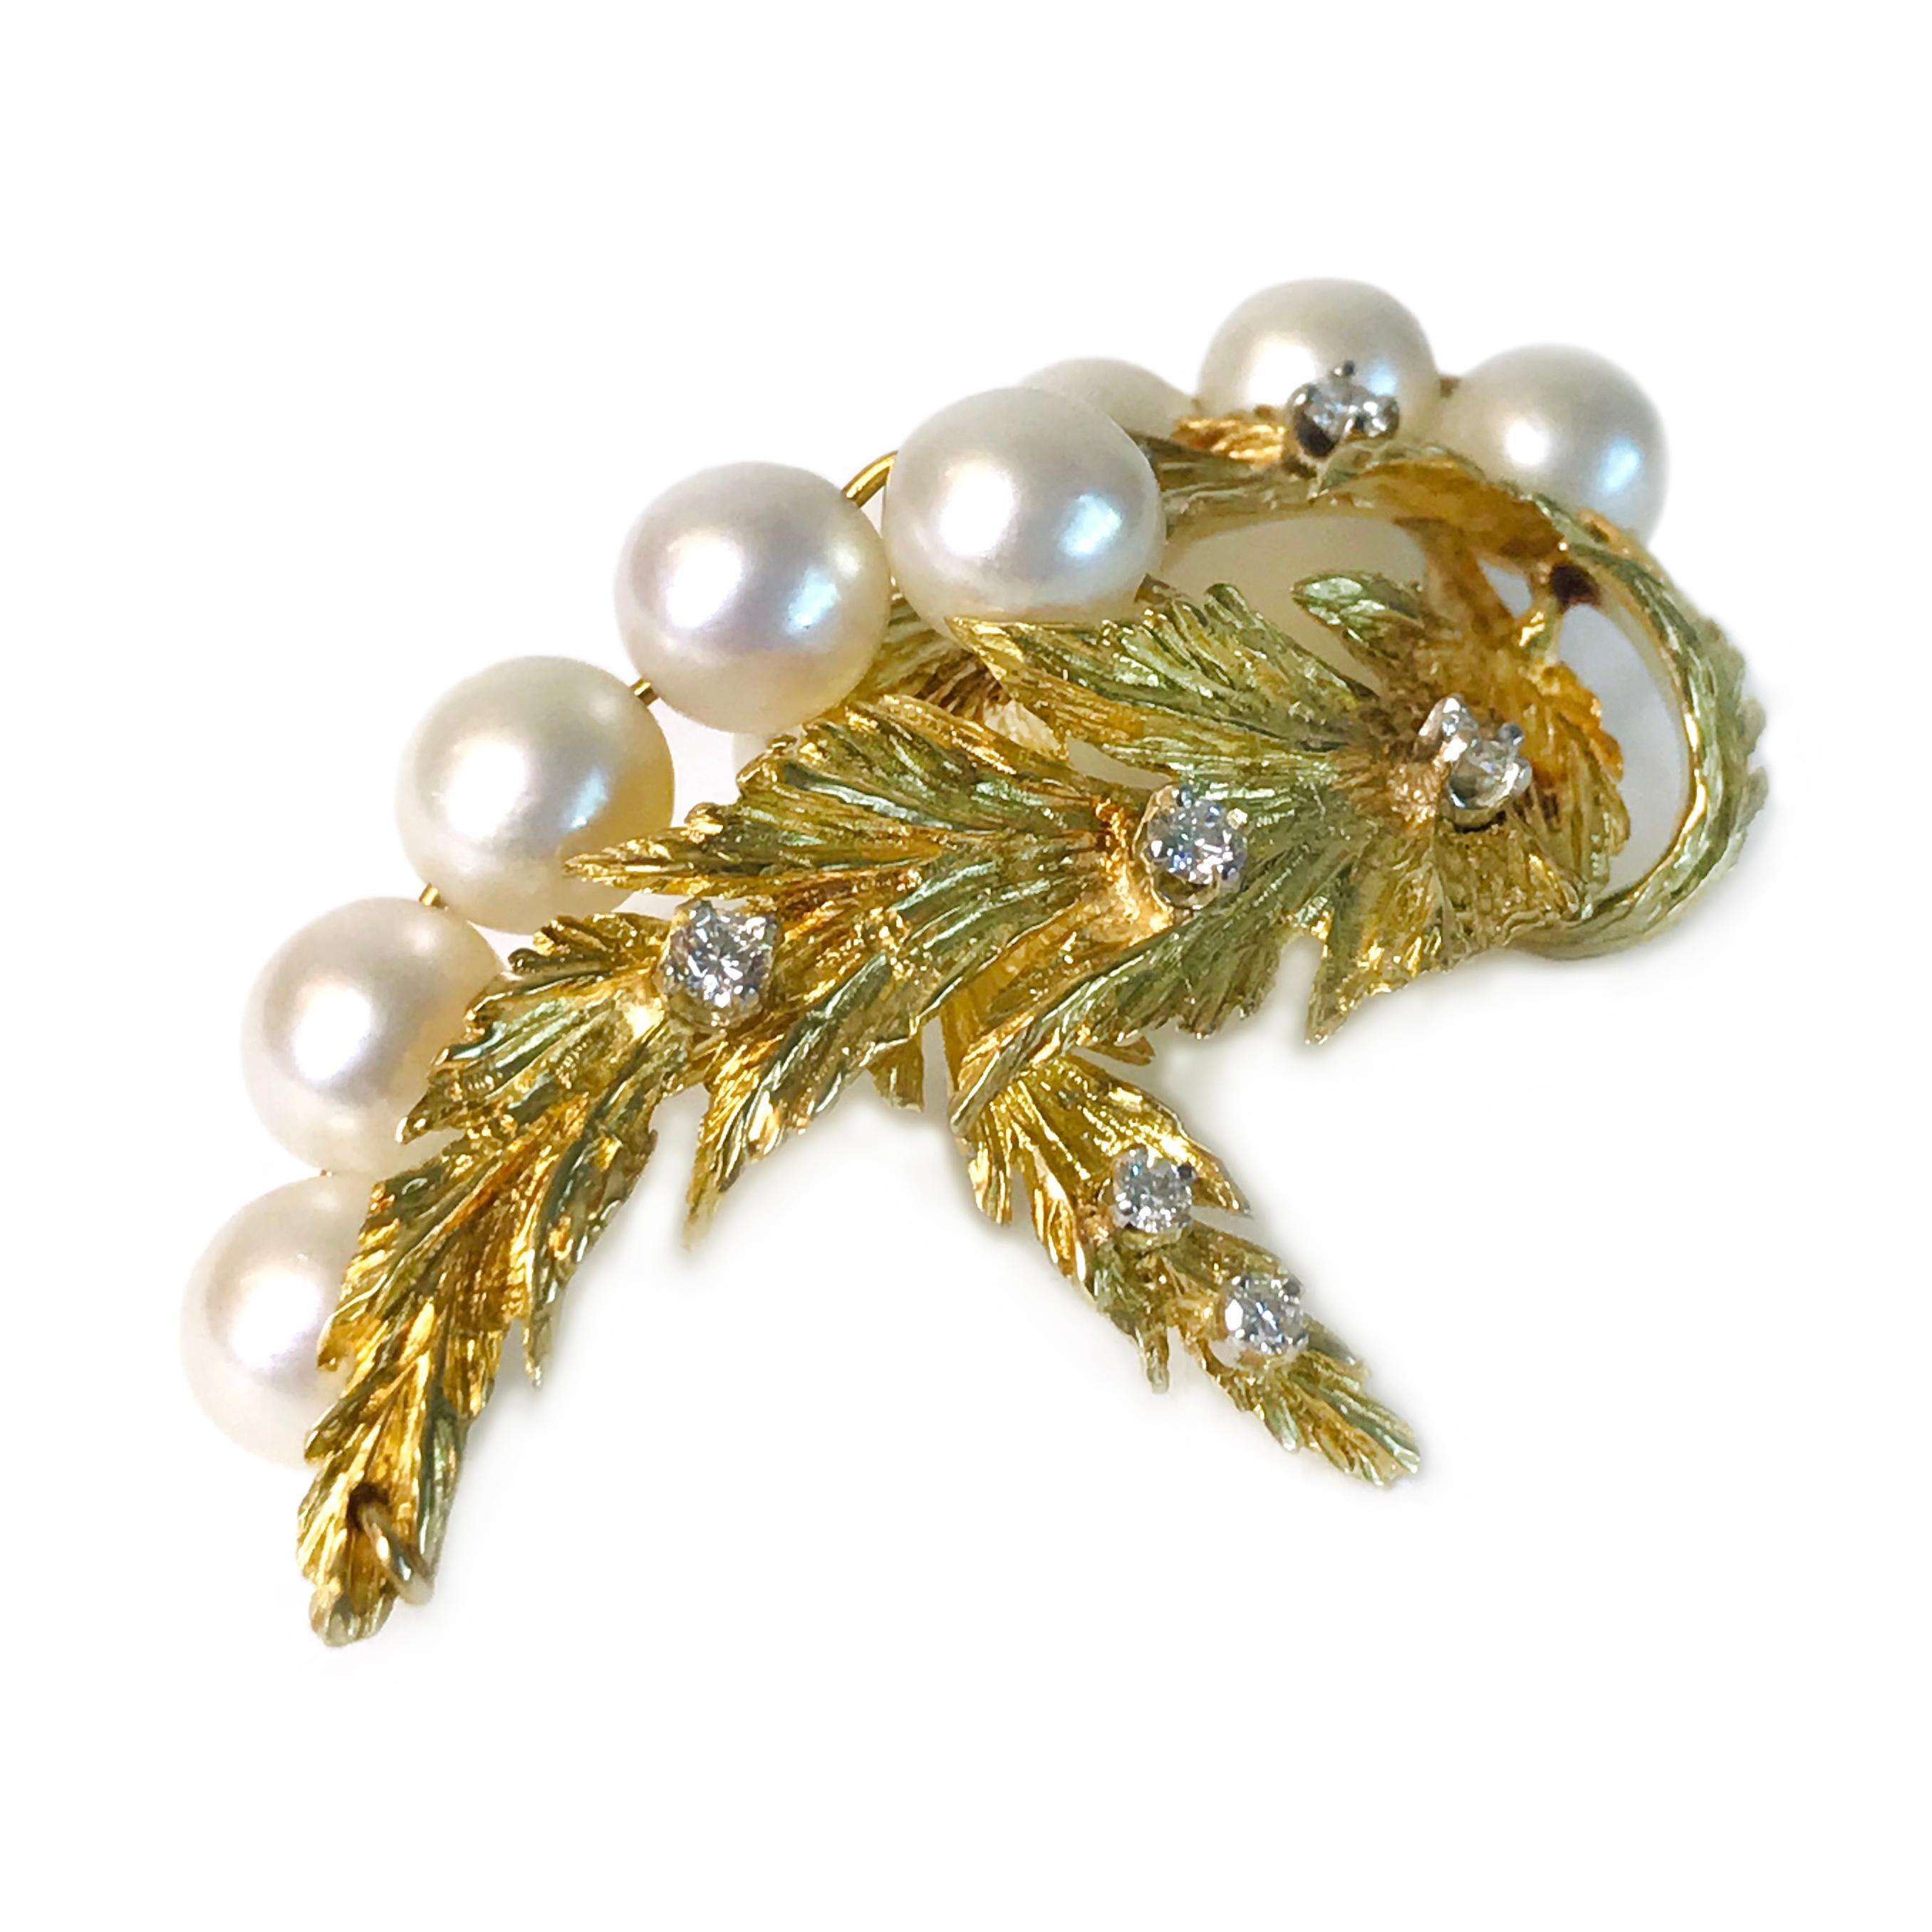 18 Karat Diamond Pearl Leaves Brooch. This brooch features ten (fully-drilled) 8mm Pearls, seven diamonds and two textured gold leaves. The Pearls follow the curve of the leaves and the diamonds are prong-set on the leaves. The 8mm Pearls are A